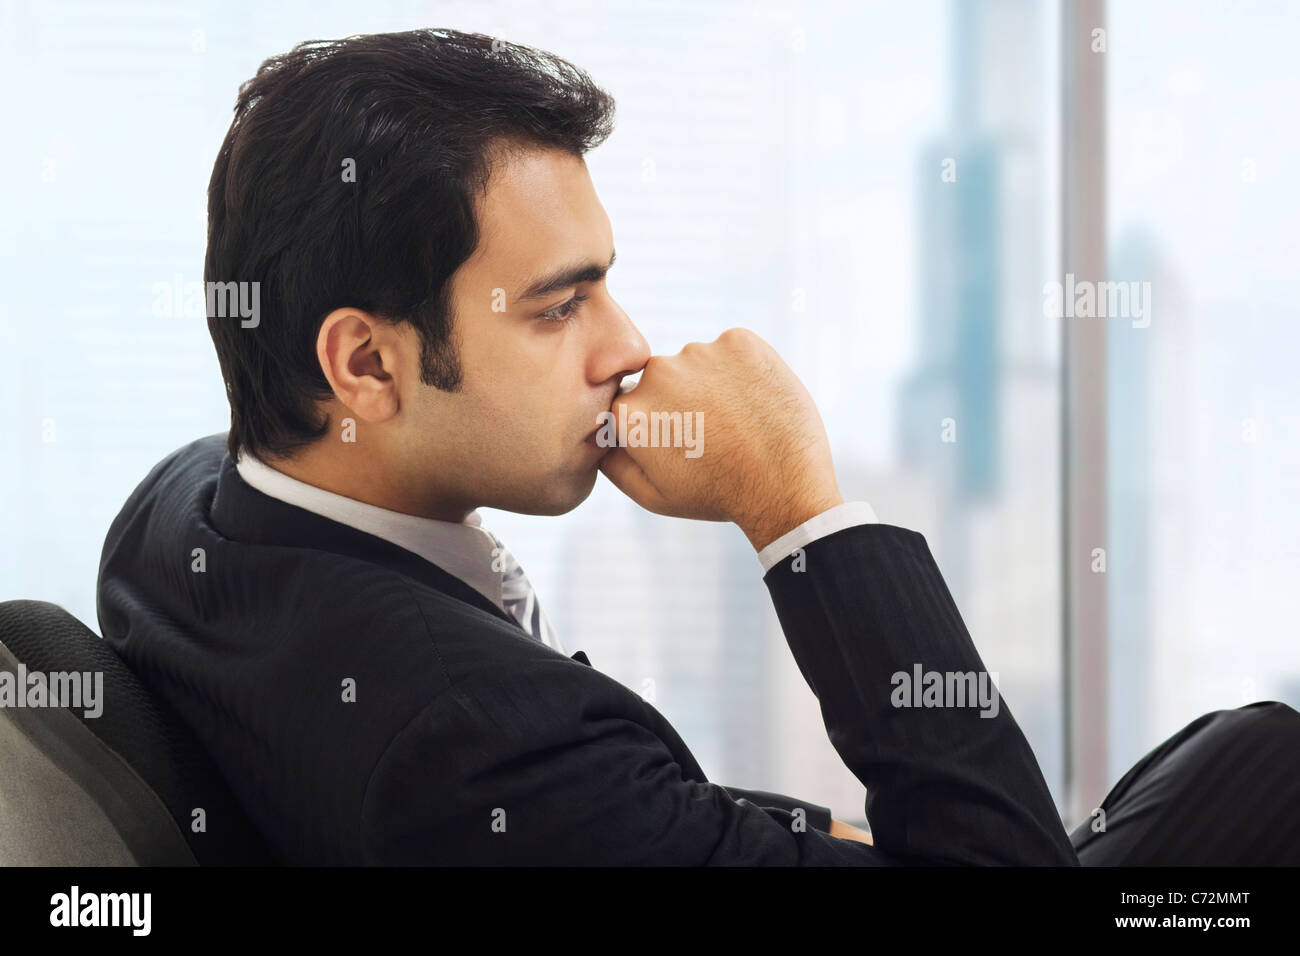 Businessman in deep thought Stock Photo